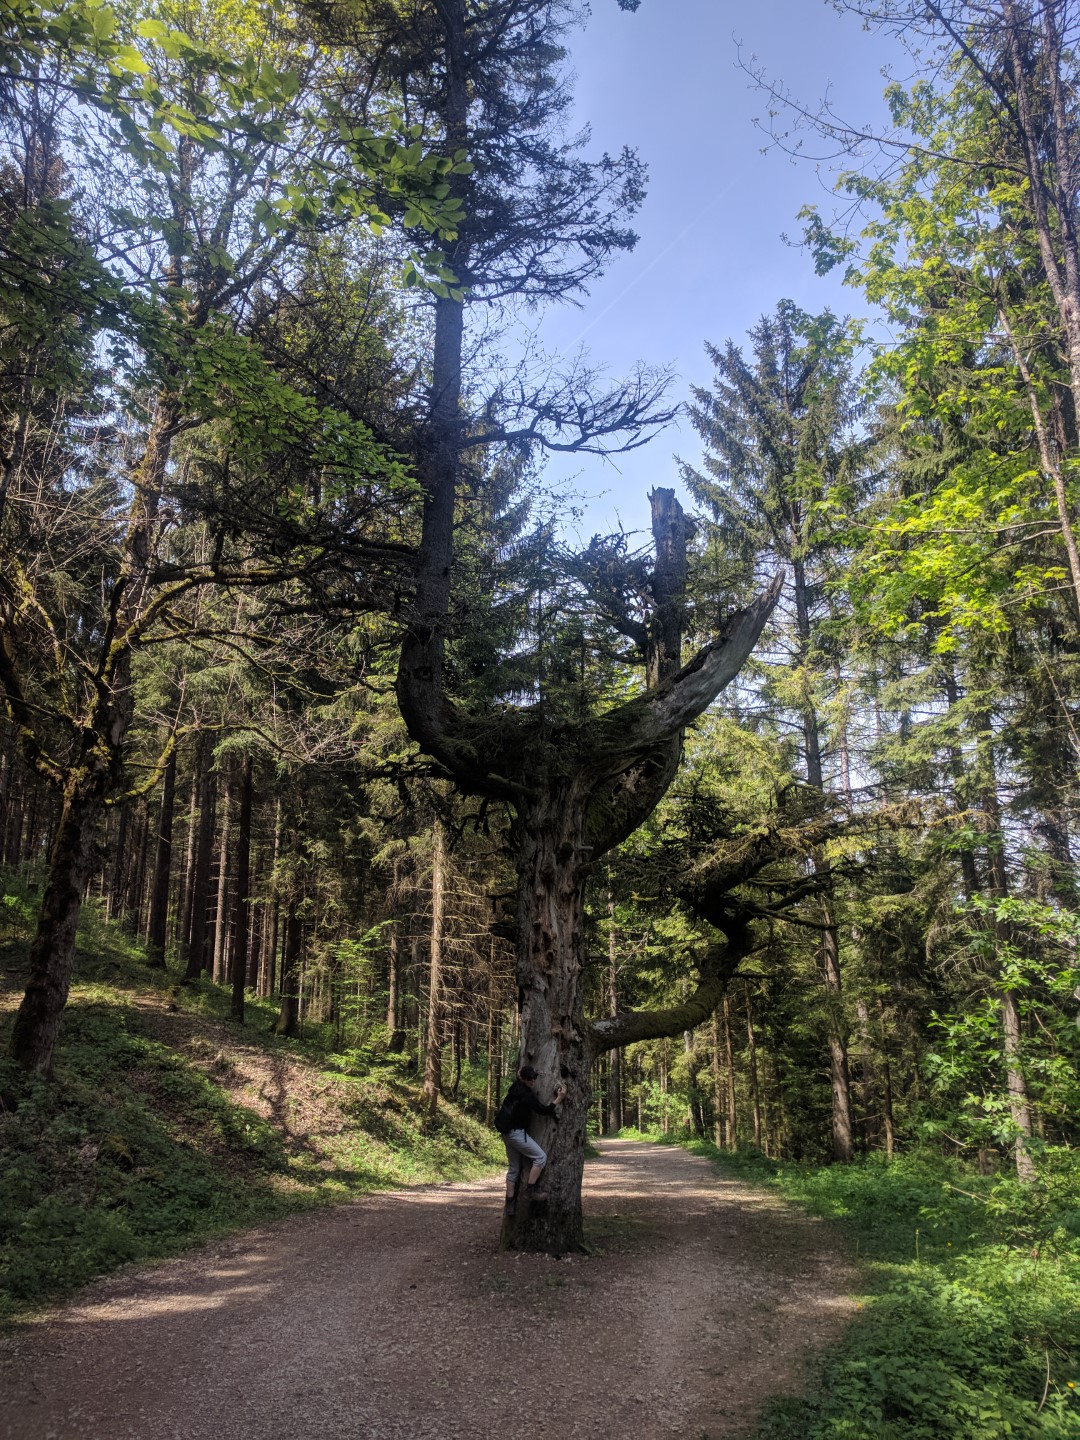 weird tree on the road